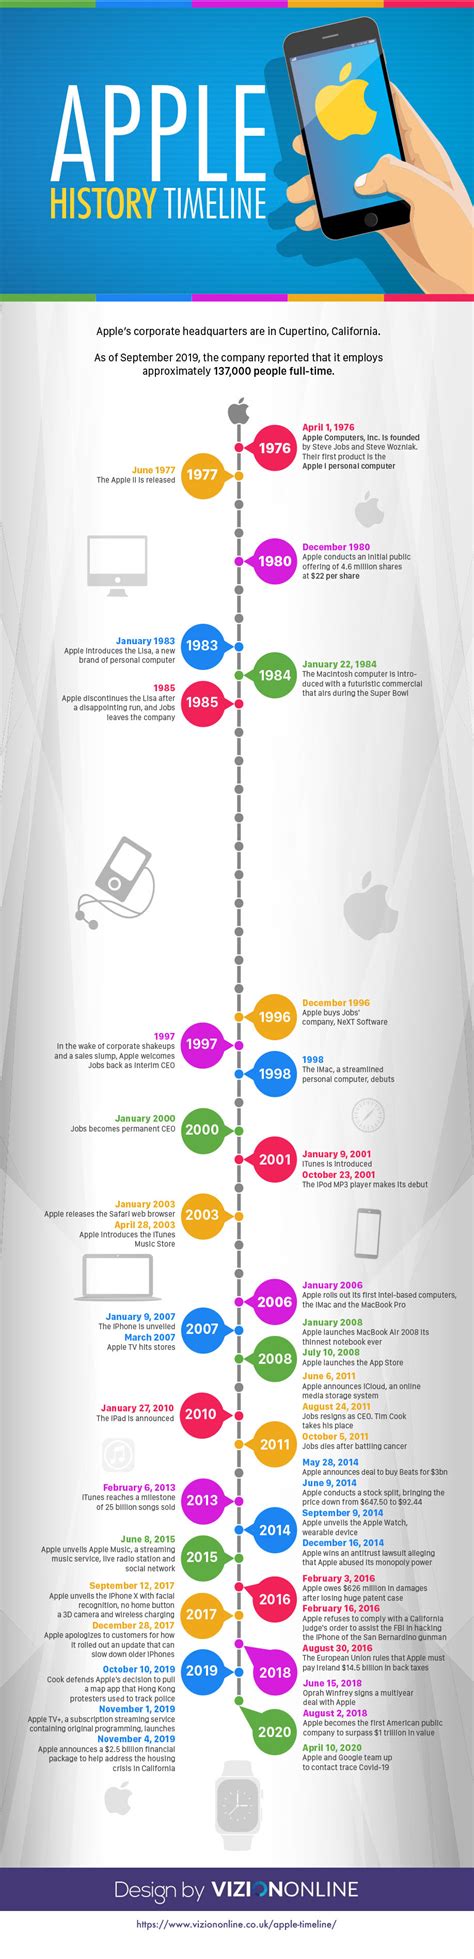 Apple History Timeline Infographic